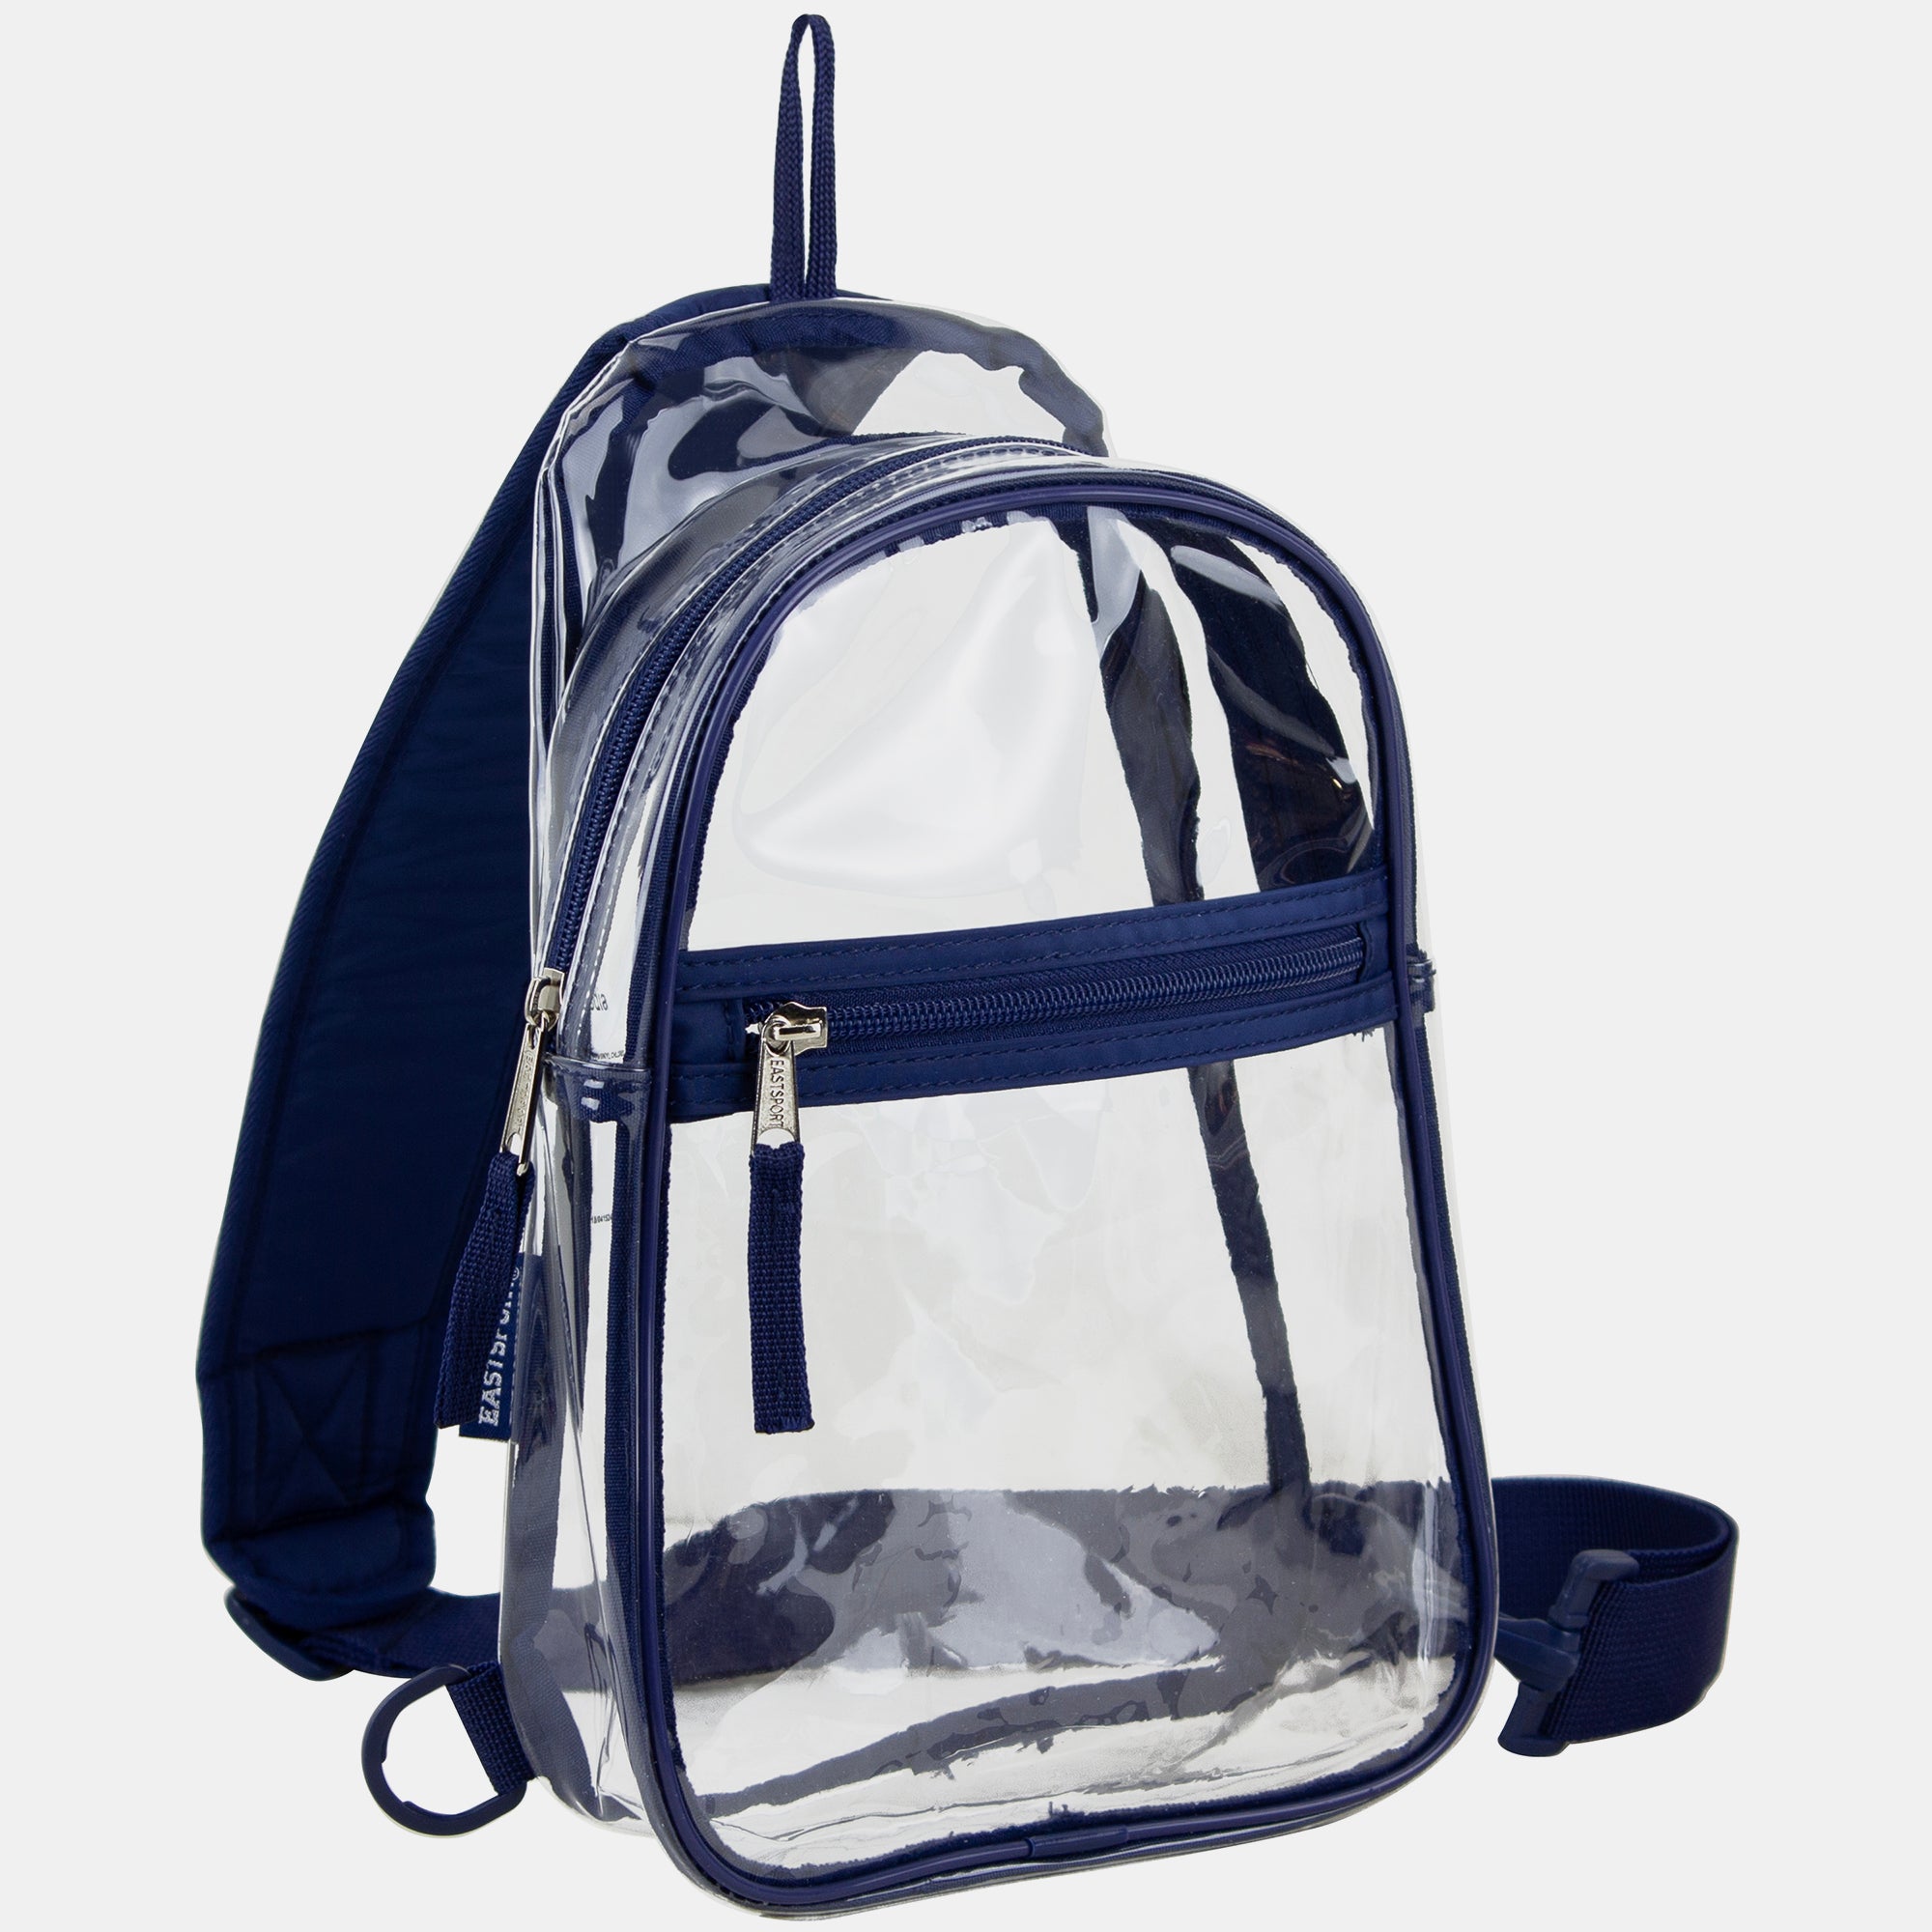 Clear Sling Stadium Approved Bag